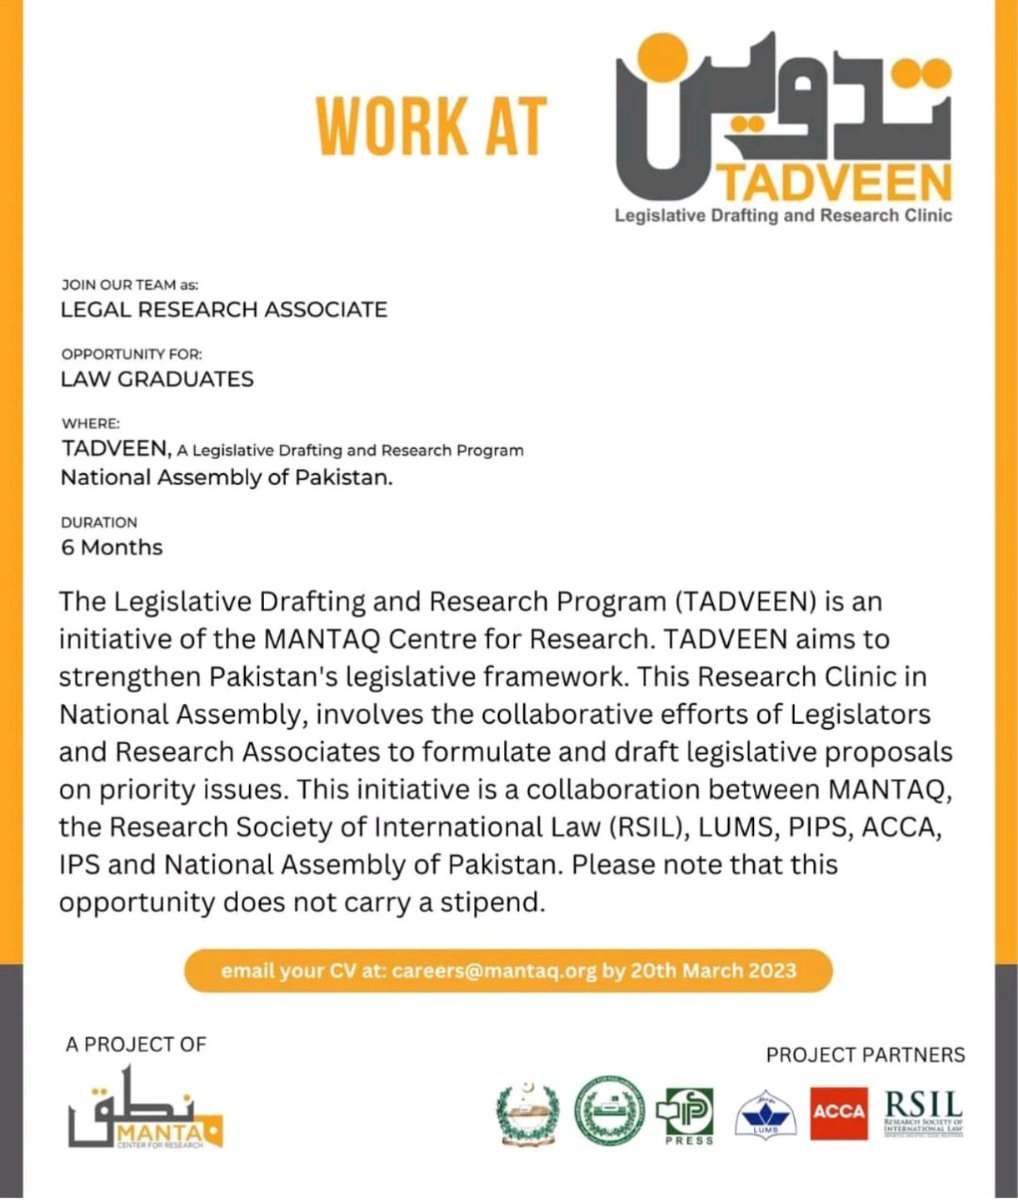 Interested in how laws are made? Join as a Research Associate at TADVEEN's Research Clinic at the National Assembly. Participants will review laws, learn legislative drafting, and conduct legal research.

#tadveen #lums #pips #rsil #acca #ips #na #lawgraduate #lawyer #internship